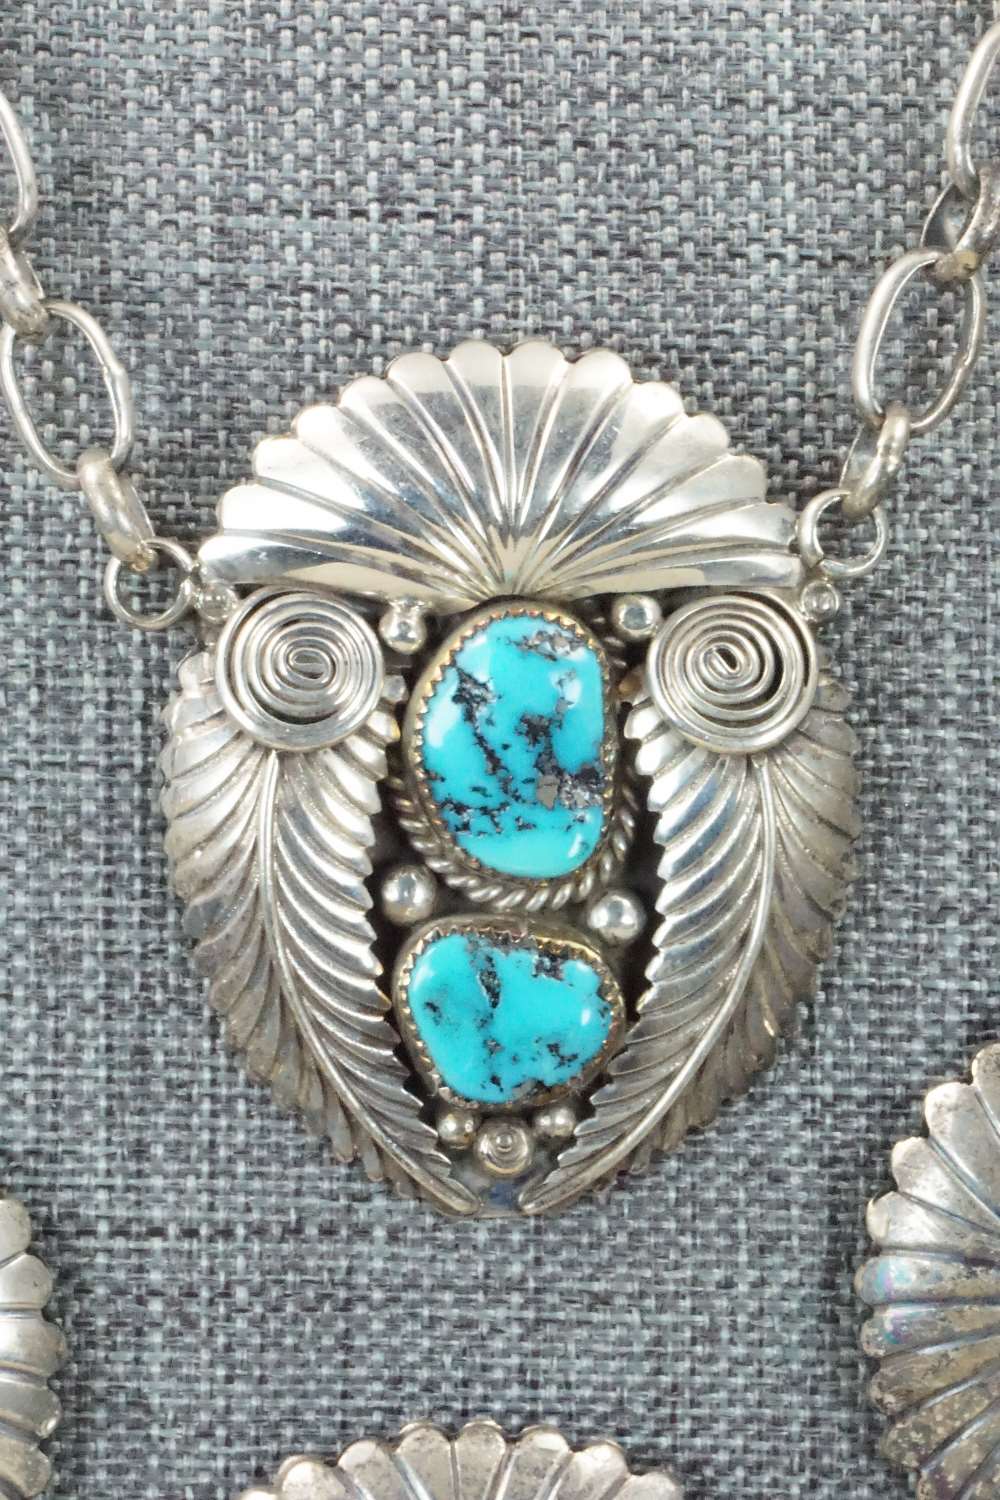 Turquoise & Sterling Silver Necklace and Earrings - Nora Tsosie